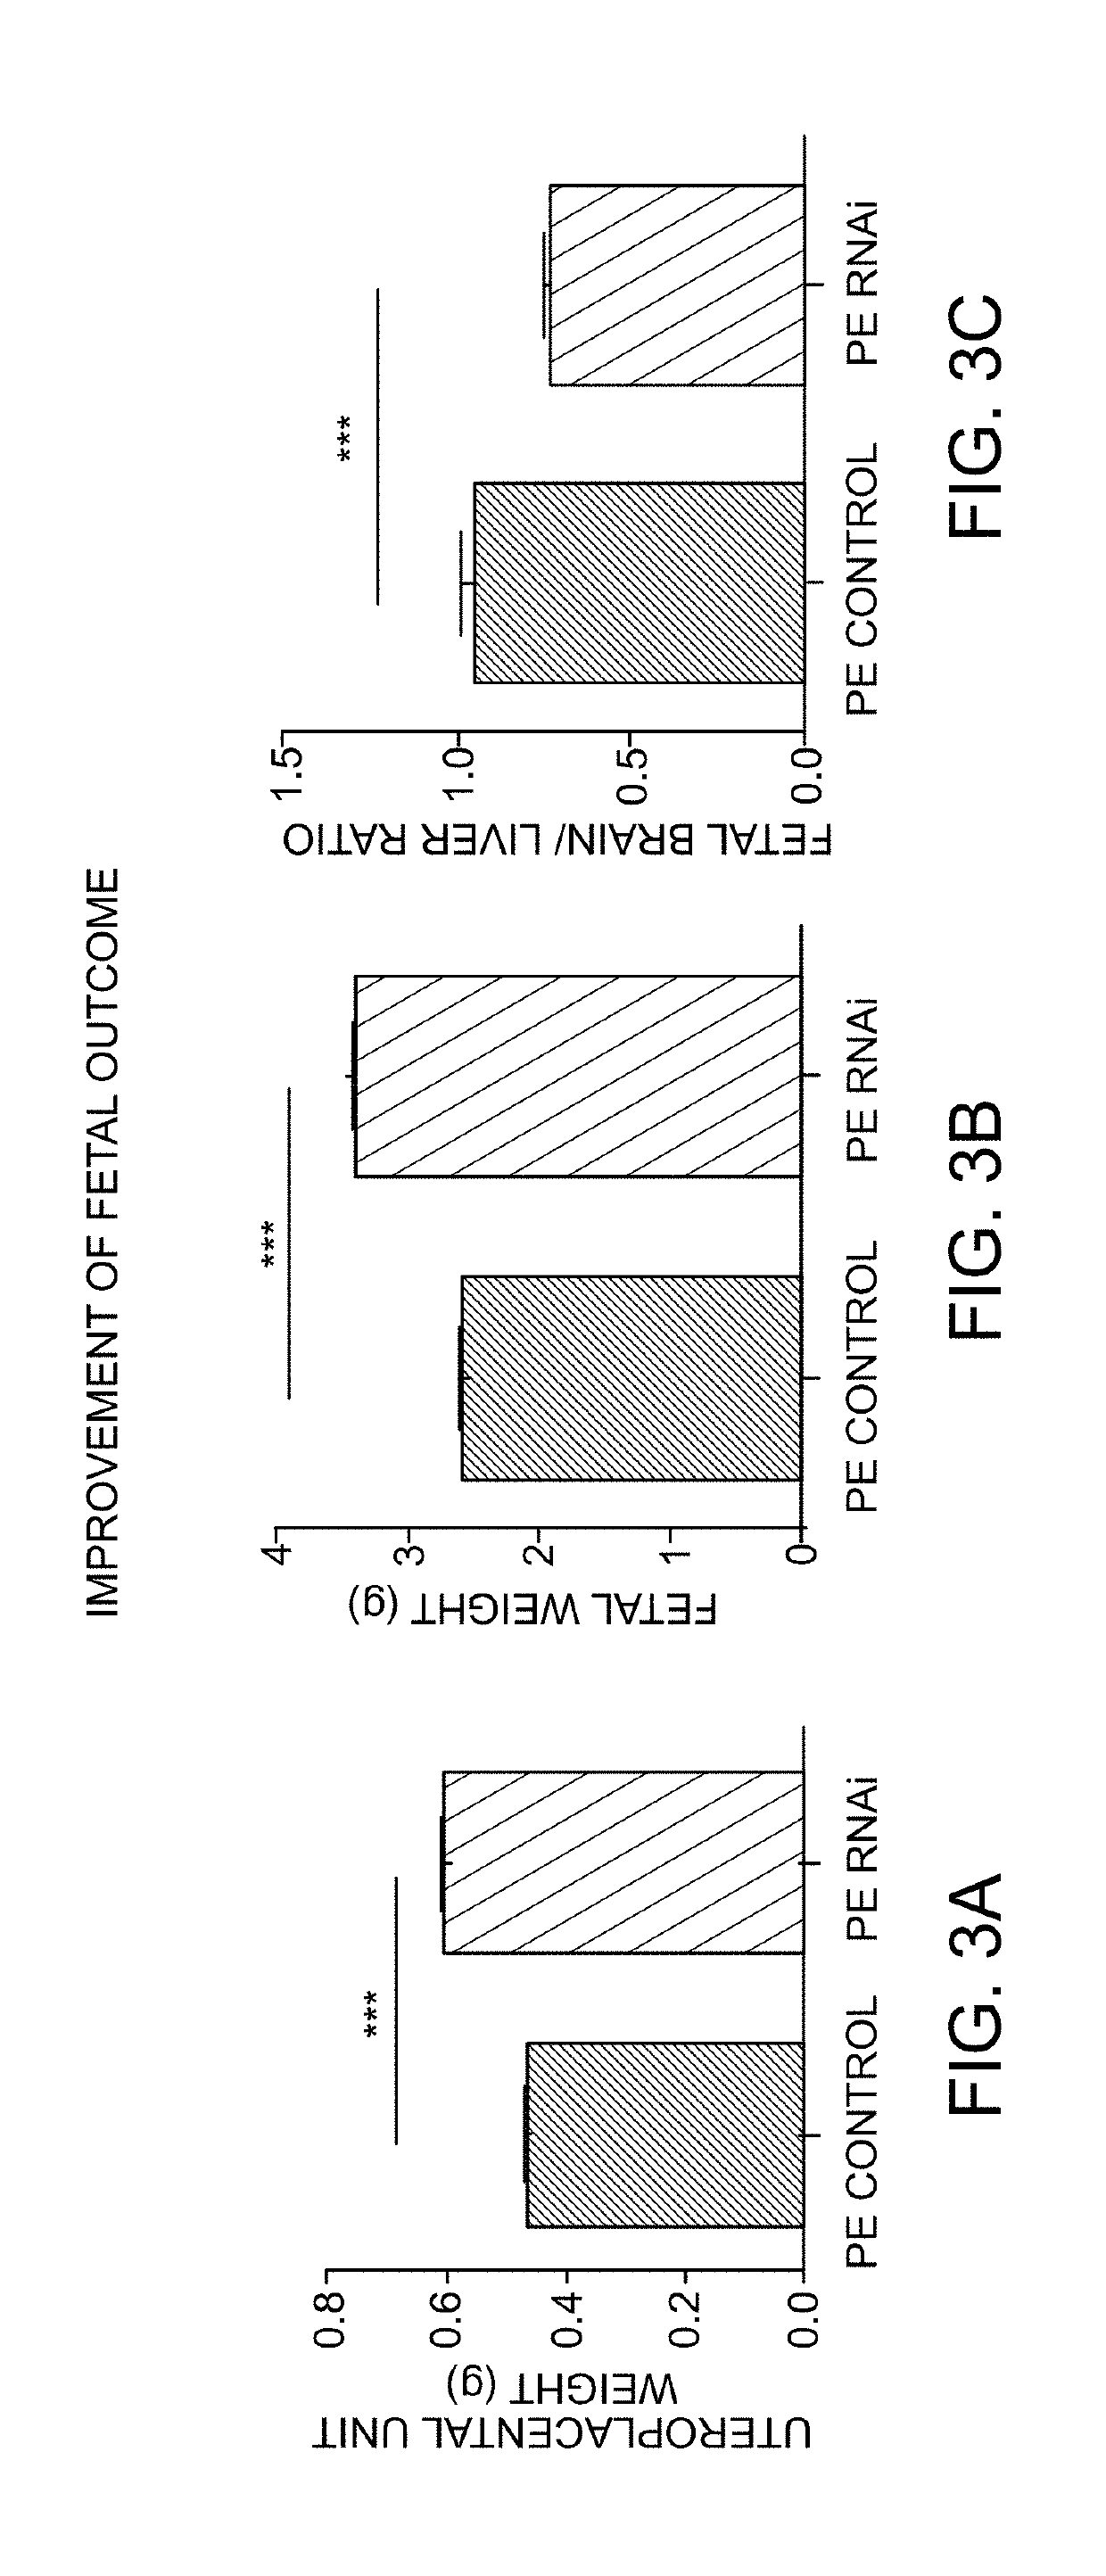 ANGIOTENSINOGEN (AGT) iRNA COMPOSITIONS AND METHODS OF USE THEREOF